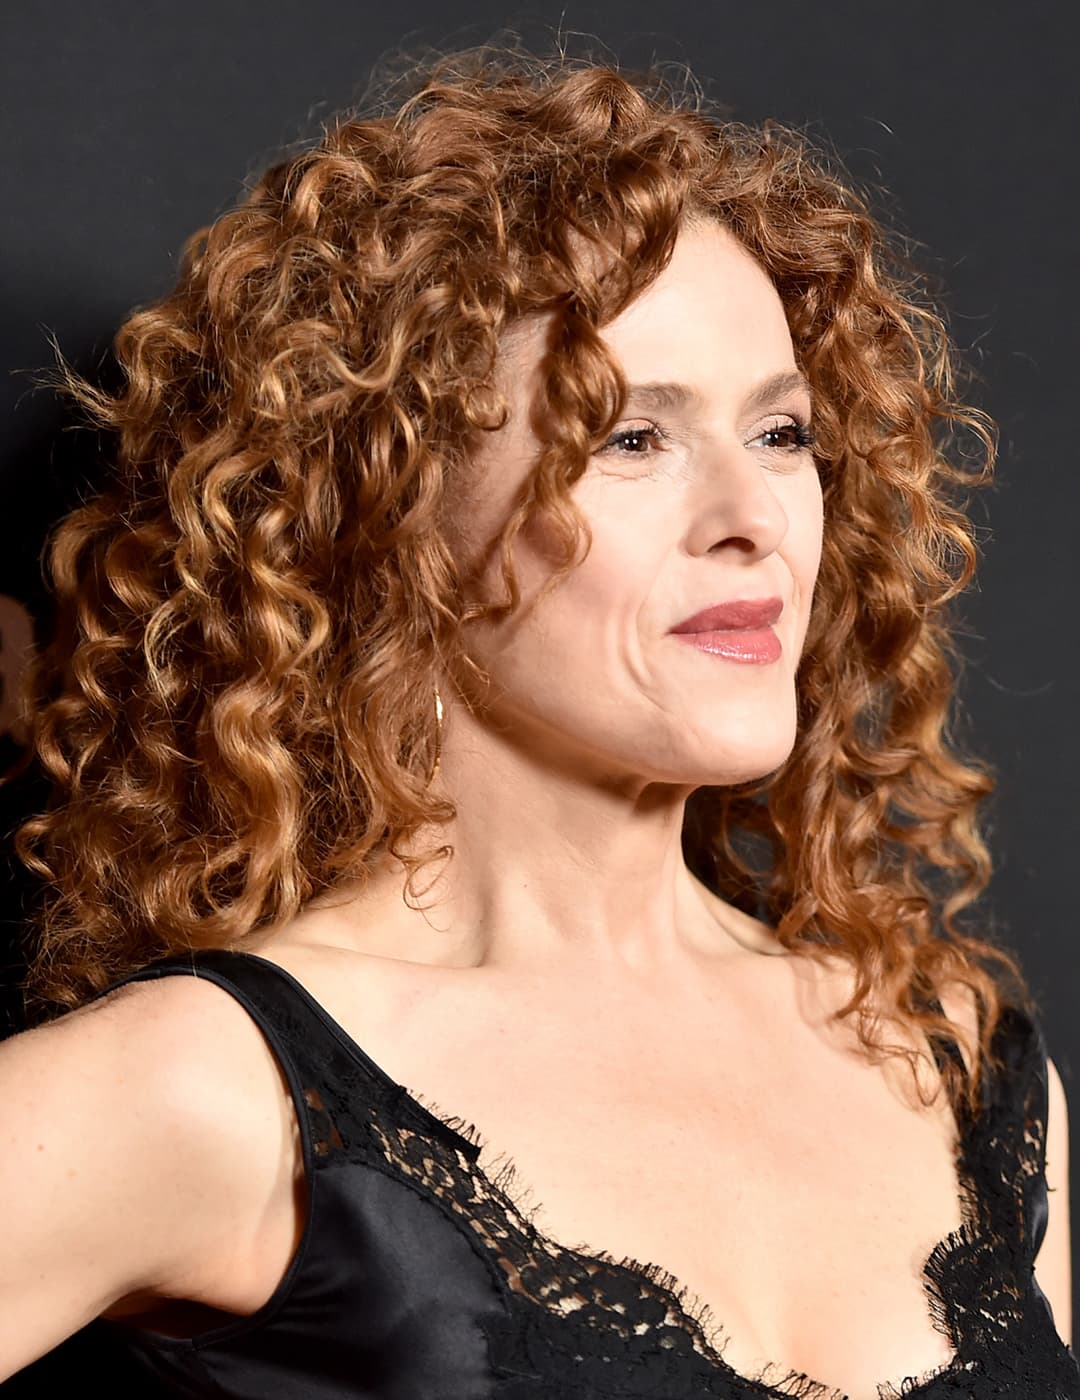 A photo of Bernadette Peters in her natural voluminous curls dressed in a black satin get up  